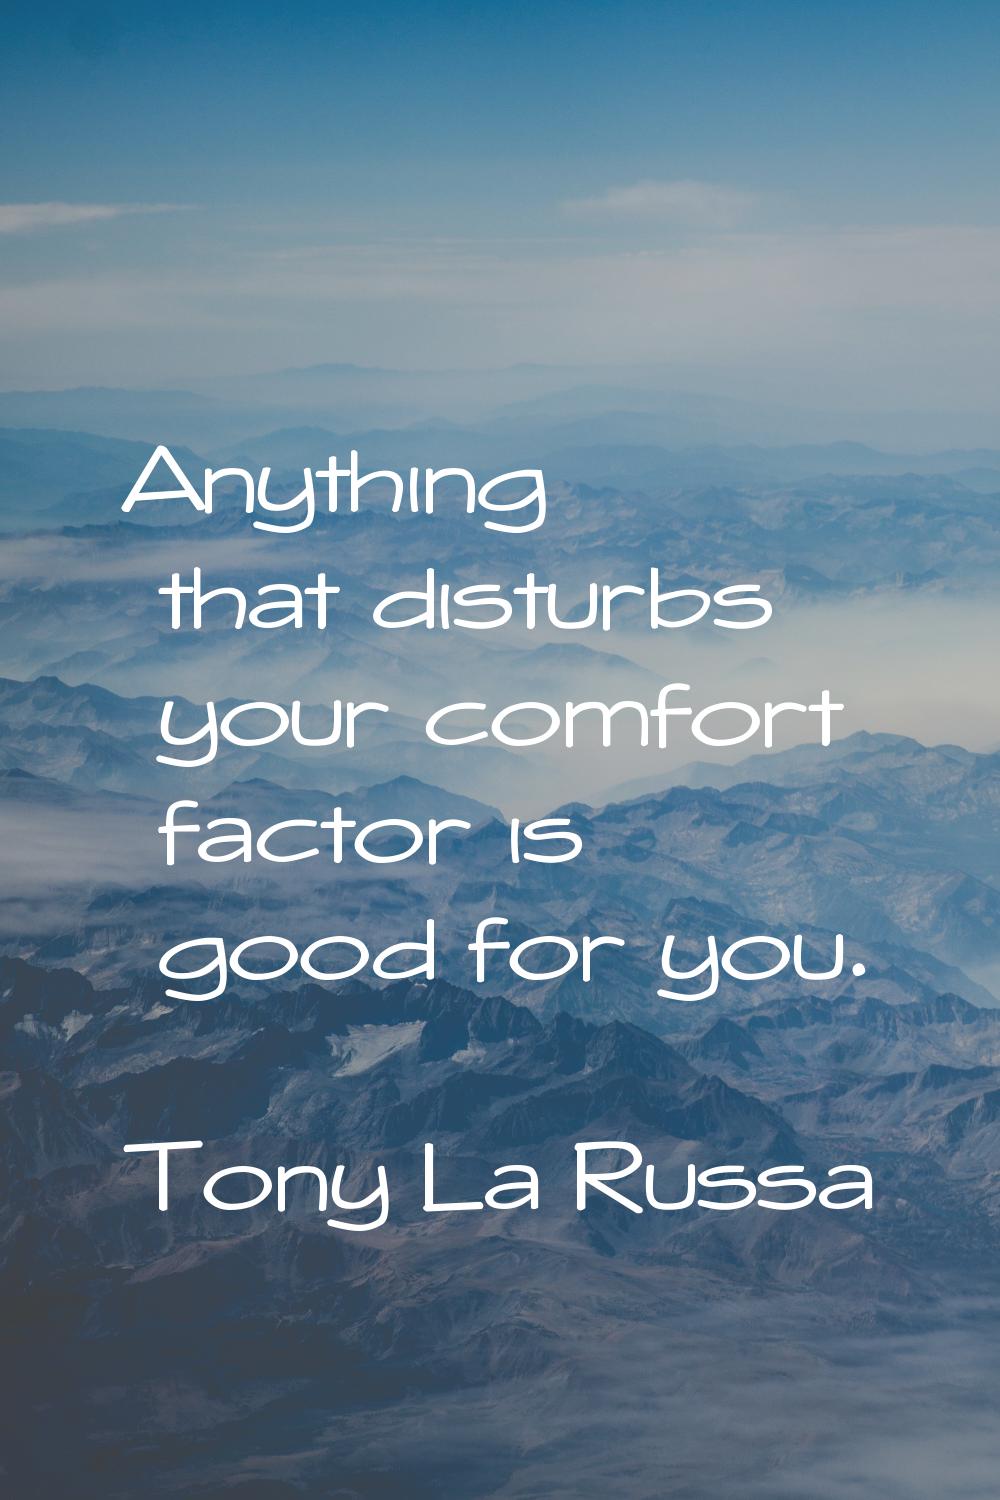 Anything that disturbs your comfort factor is good for you.